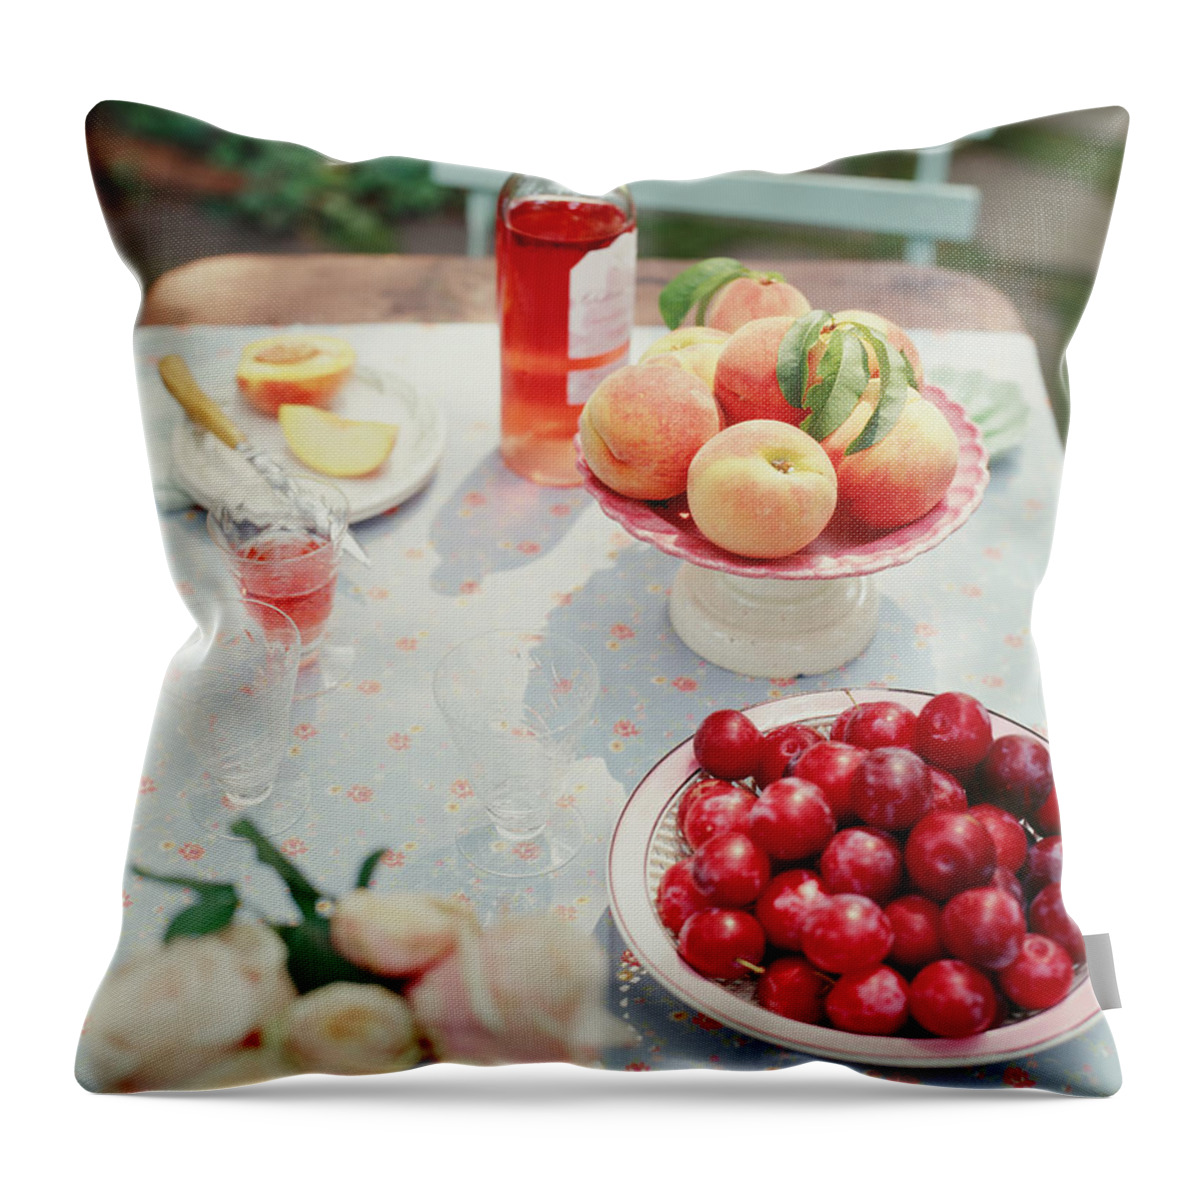 Plum Throw Pillow featuring the photograph Plums, Peaches, Wine And Flowers On A by Victoria Pearson